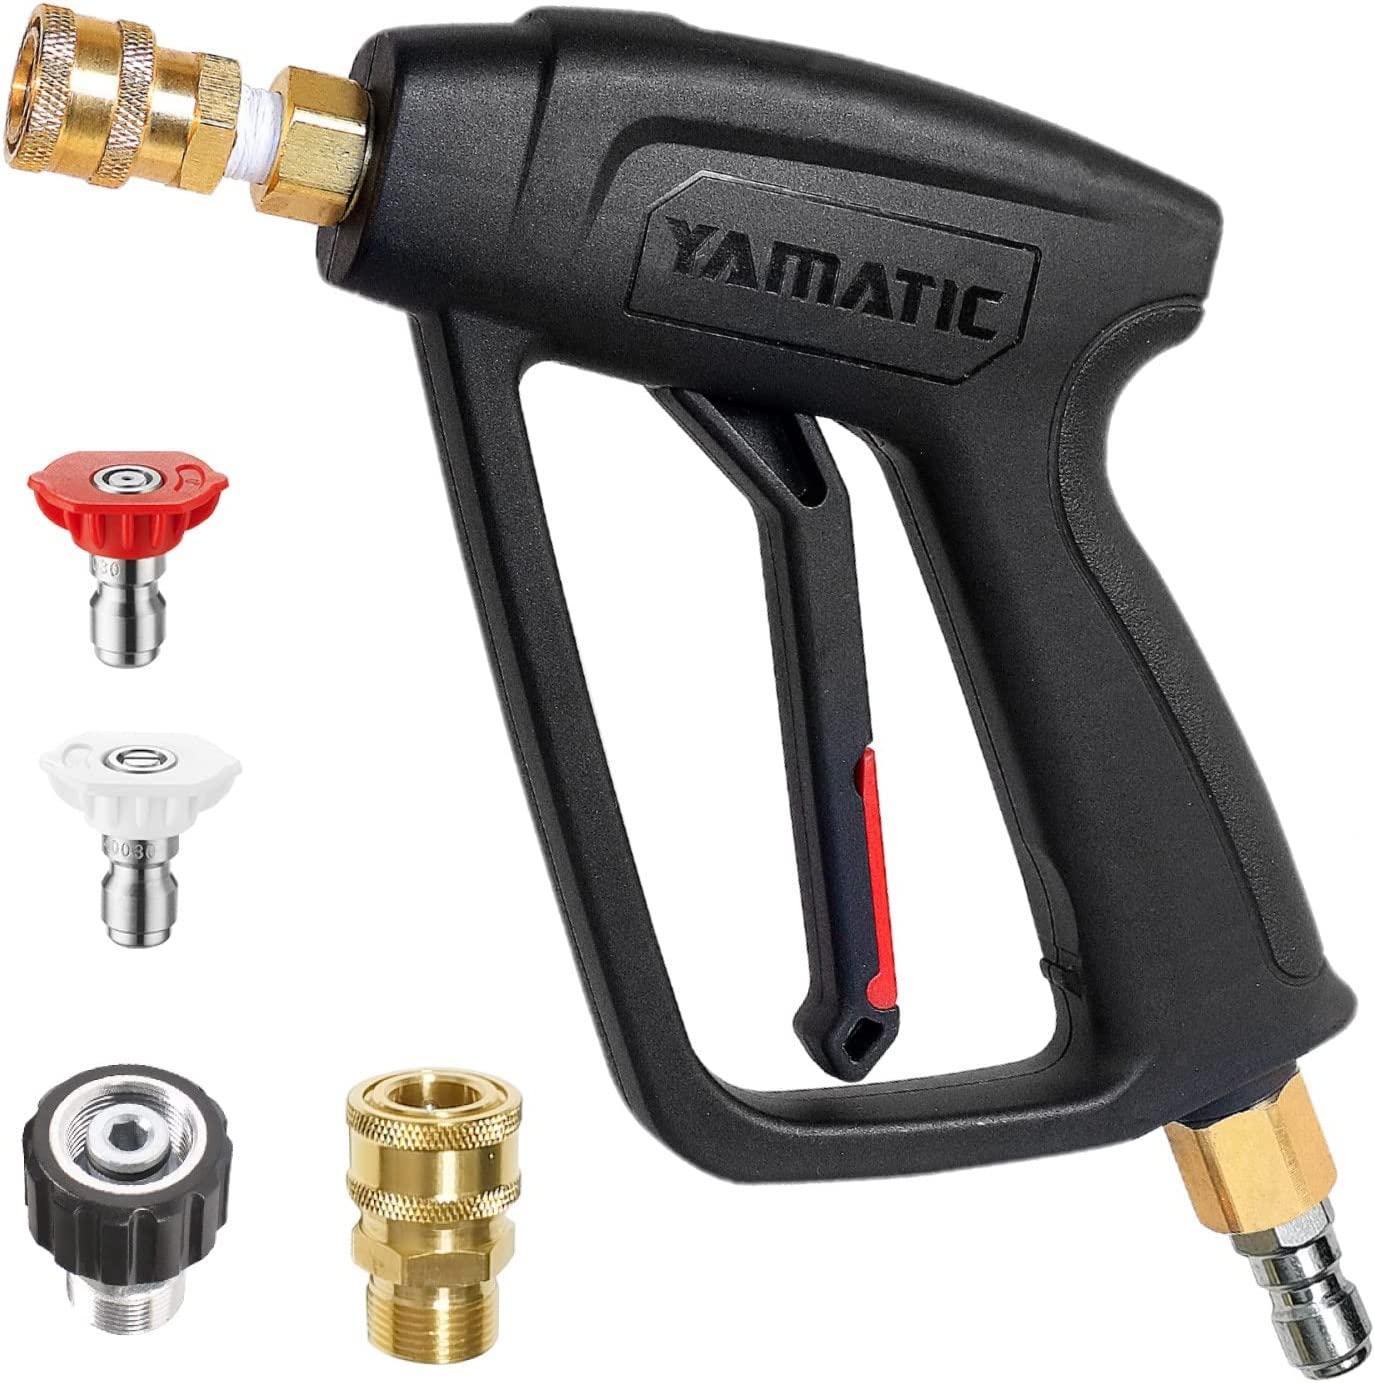 YAMATIC W Pressure Washer Gun with 3/8" Swivel Quick Connector, High Power Washer Handle with M22-14mm & M22-15mm Adapter Replacement for Sun Joe, Ryobi..